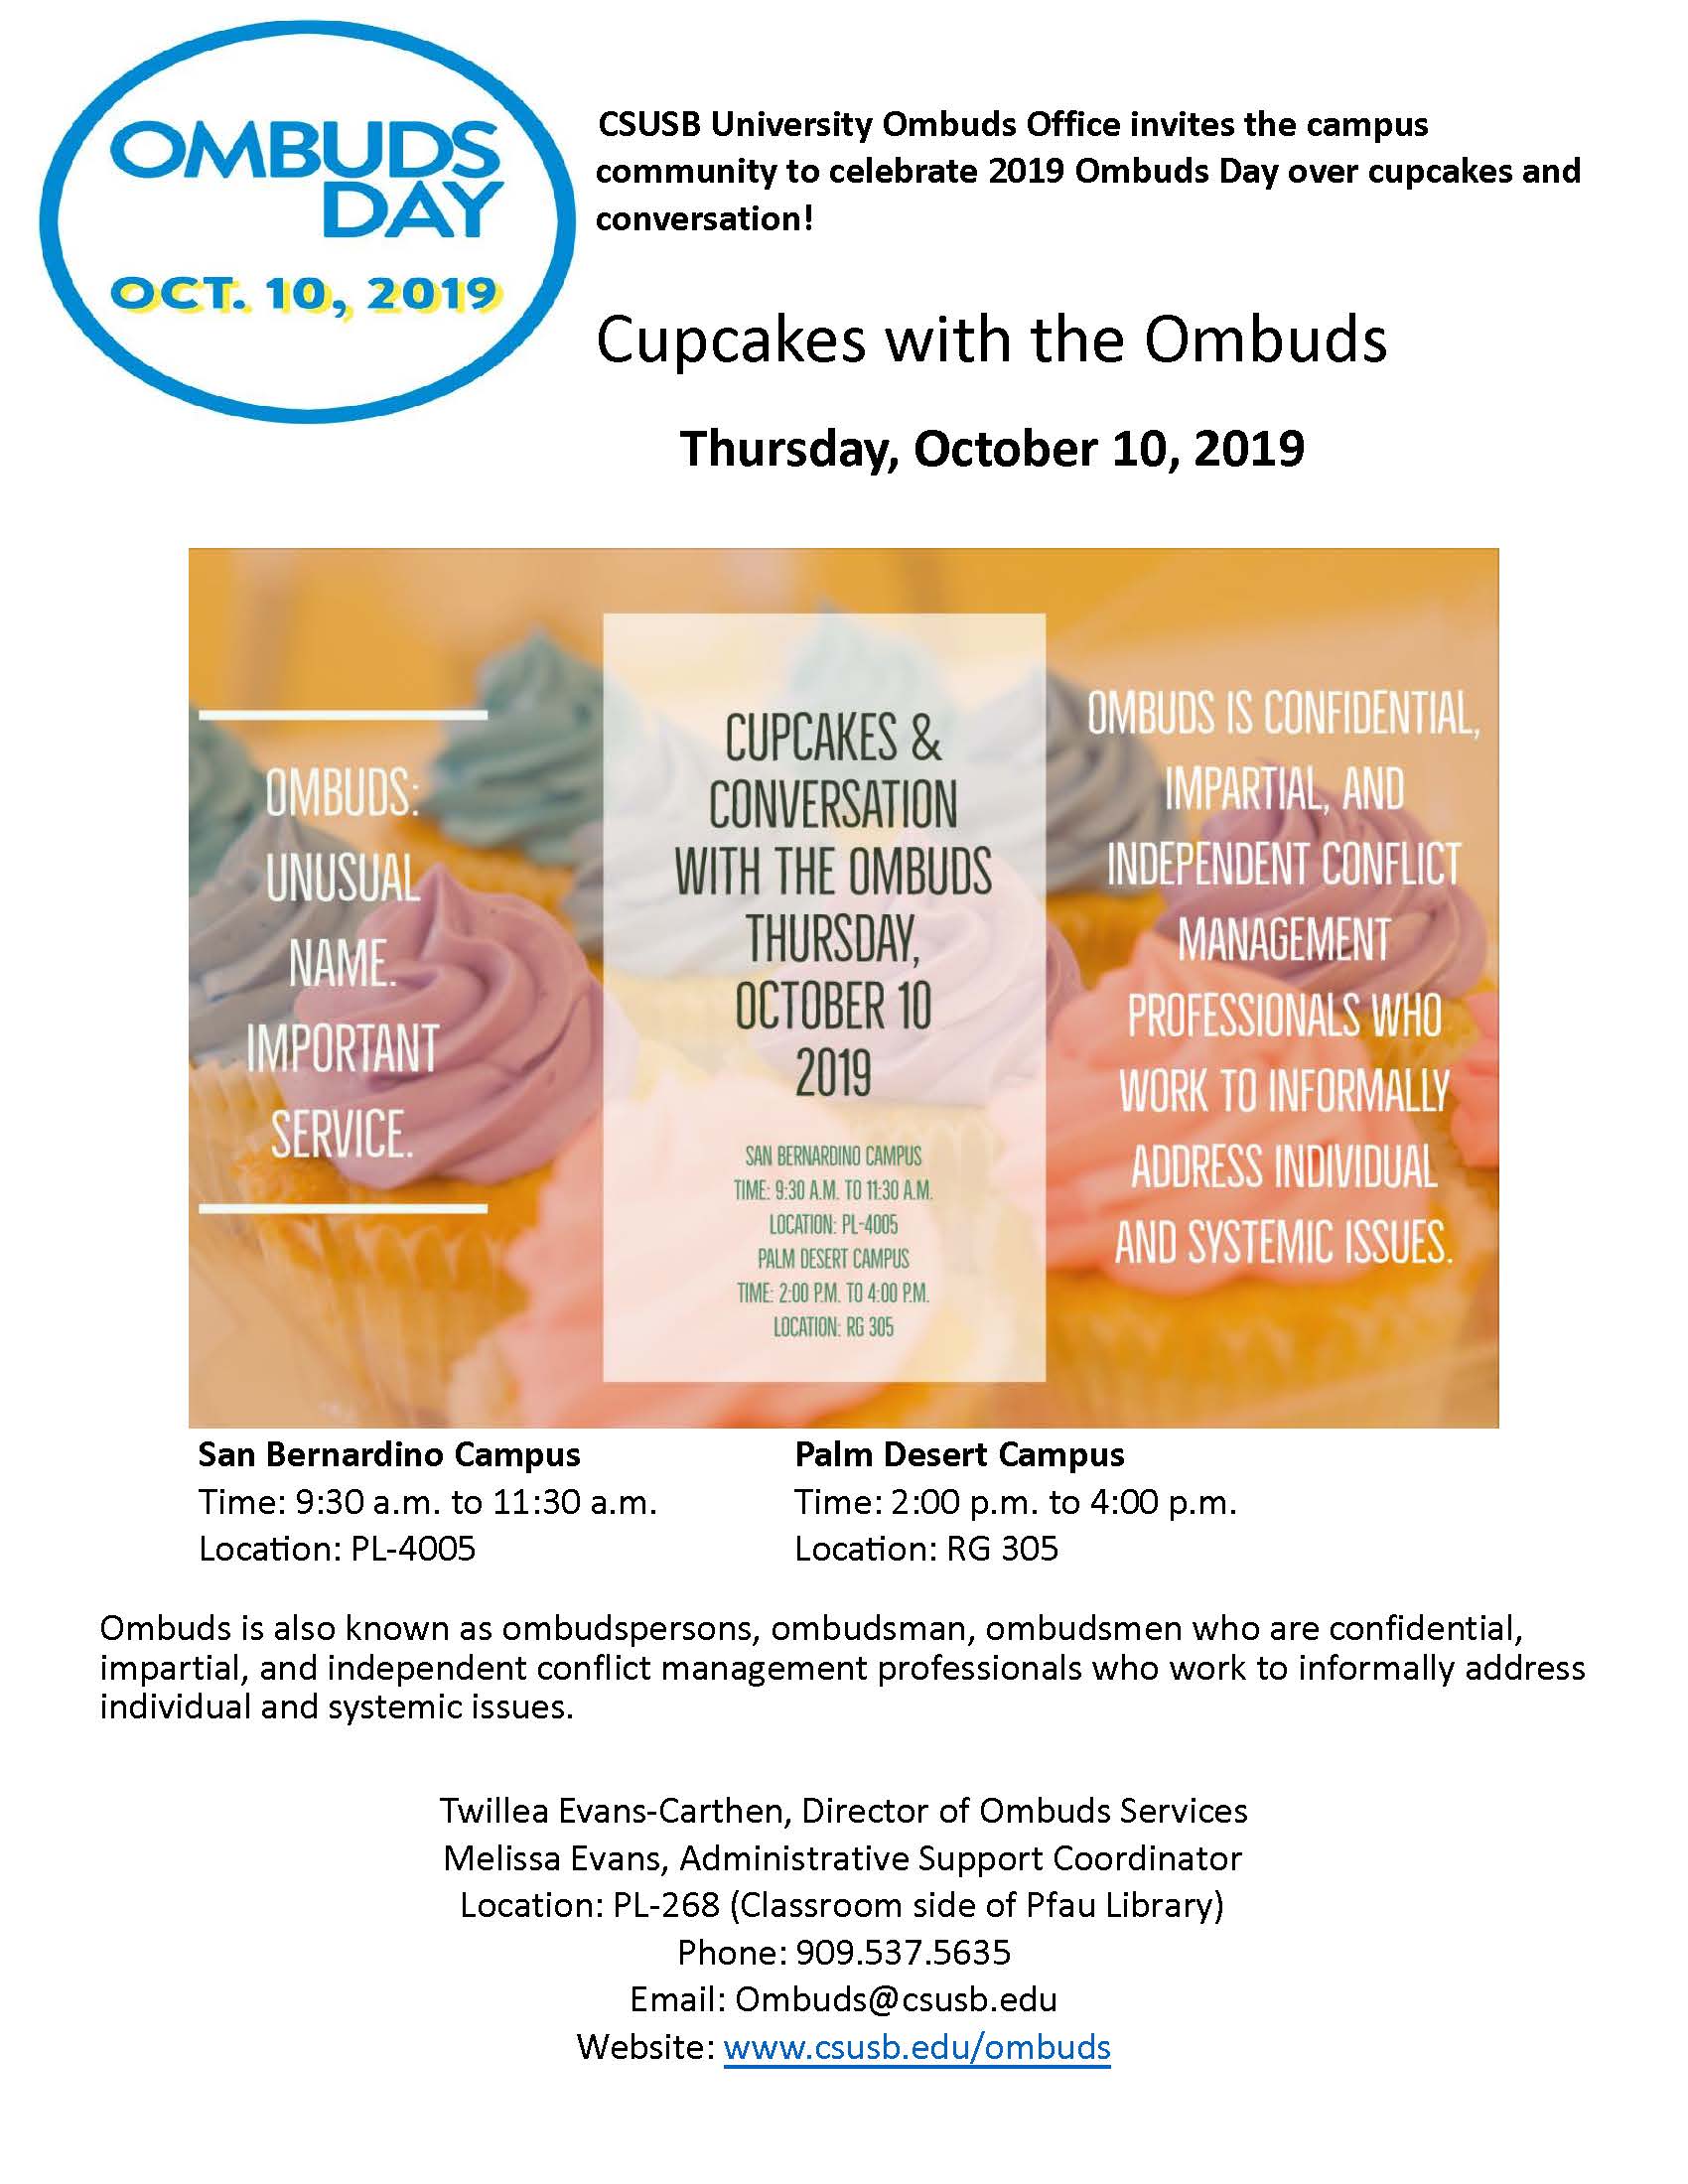 Cupcakes and Conversation with the Ombuds 